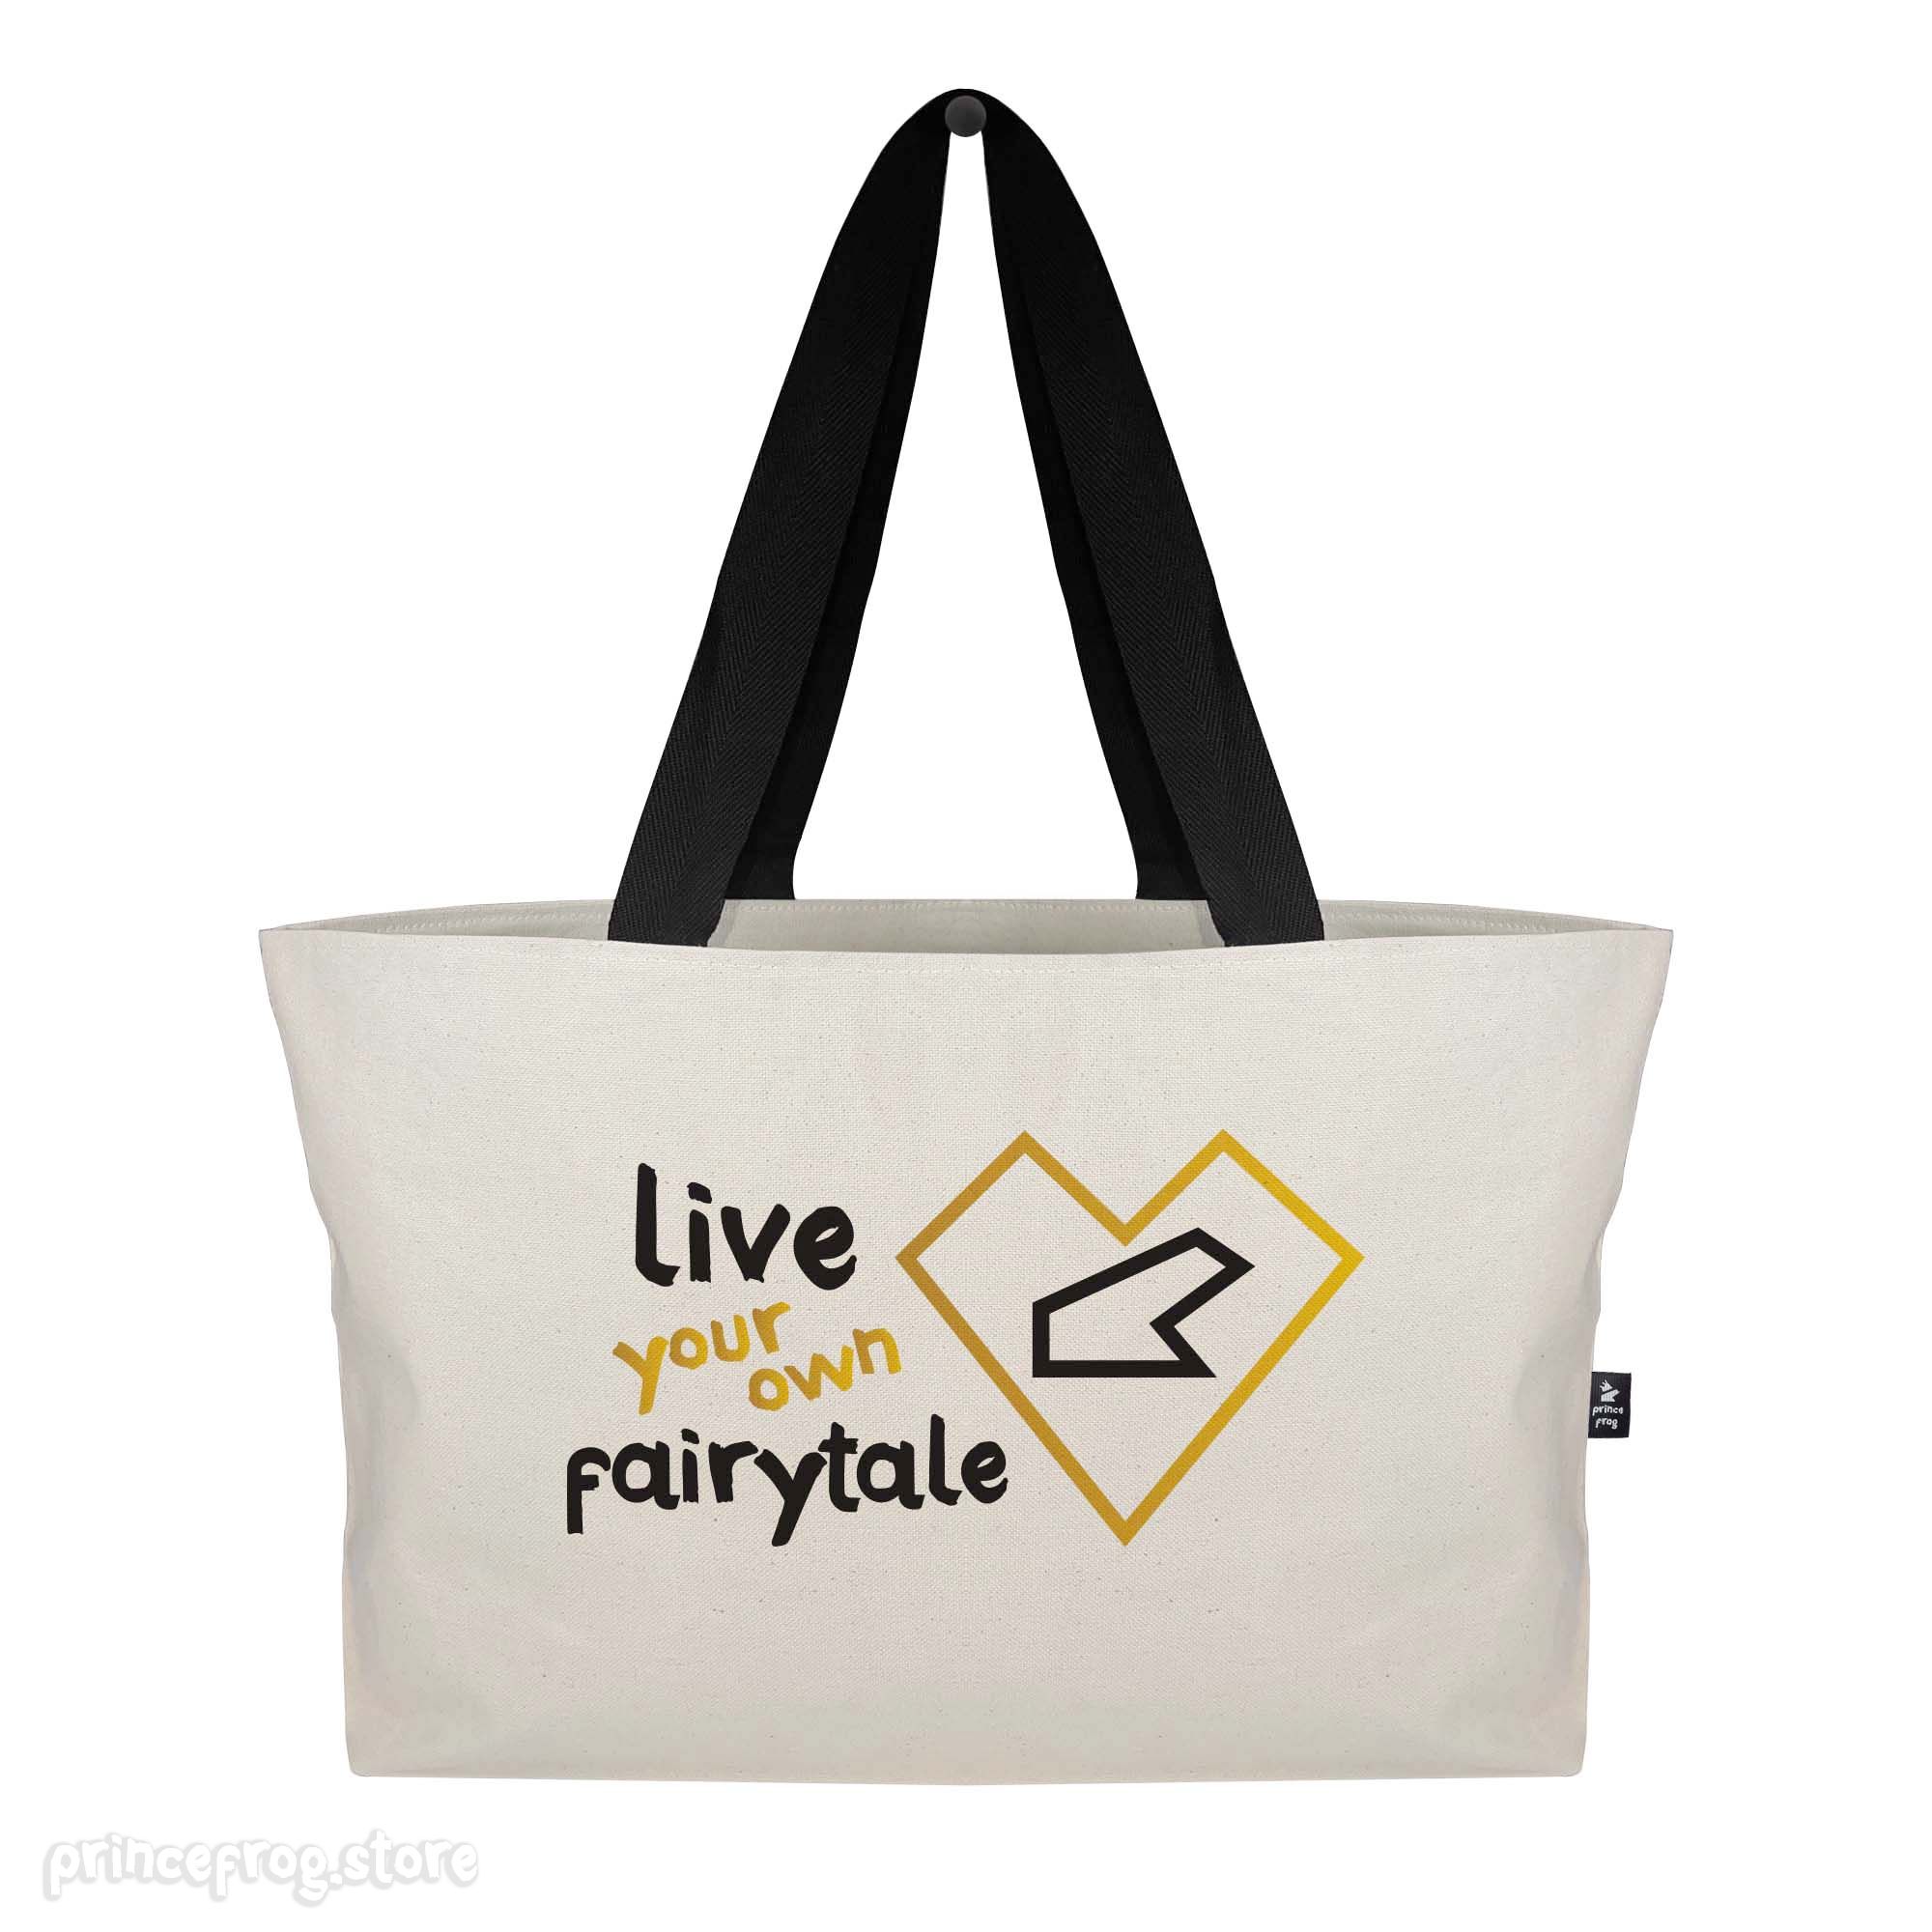 Shopping bag Live your our own fairytale 4